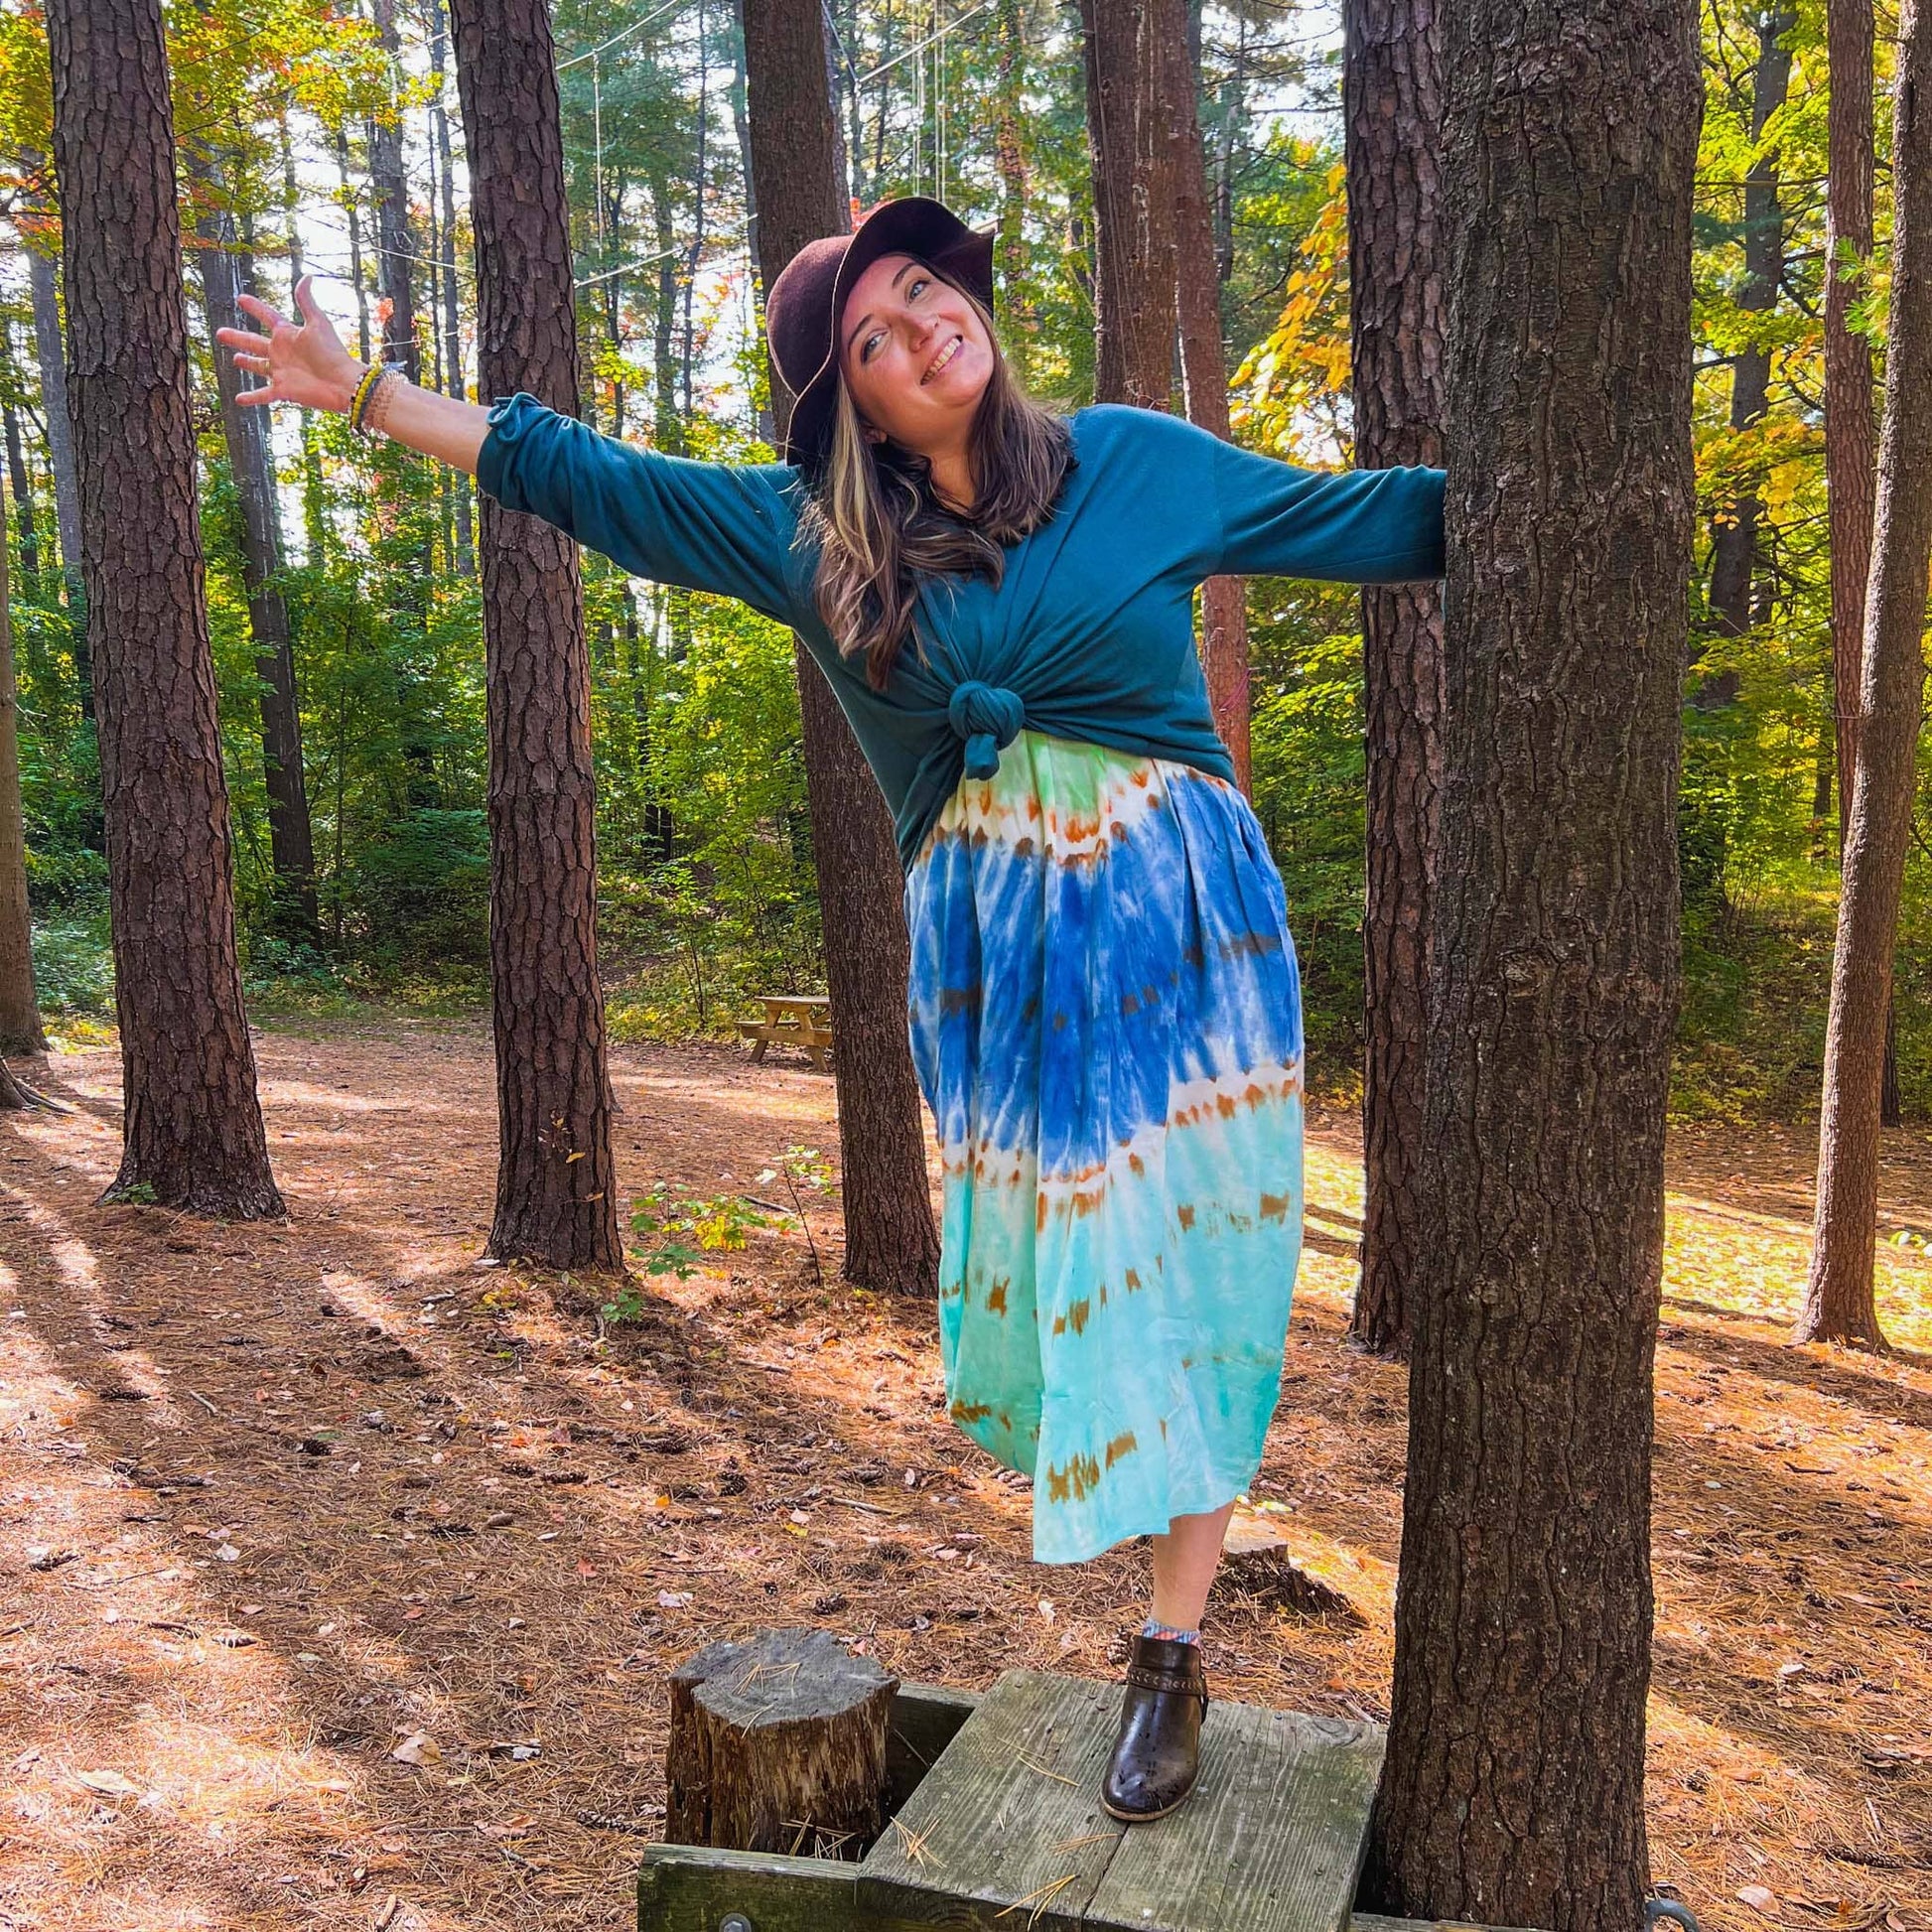 Young woman in tie dye dress, long sleeve blue green top and brown hat standing in woods and holding onto tree and leaning to one side smiling kindly at the camera.